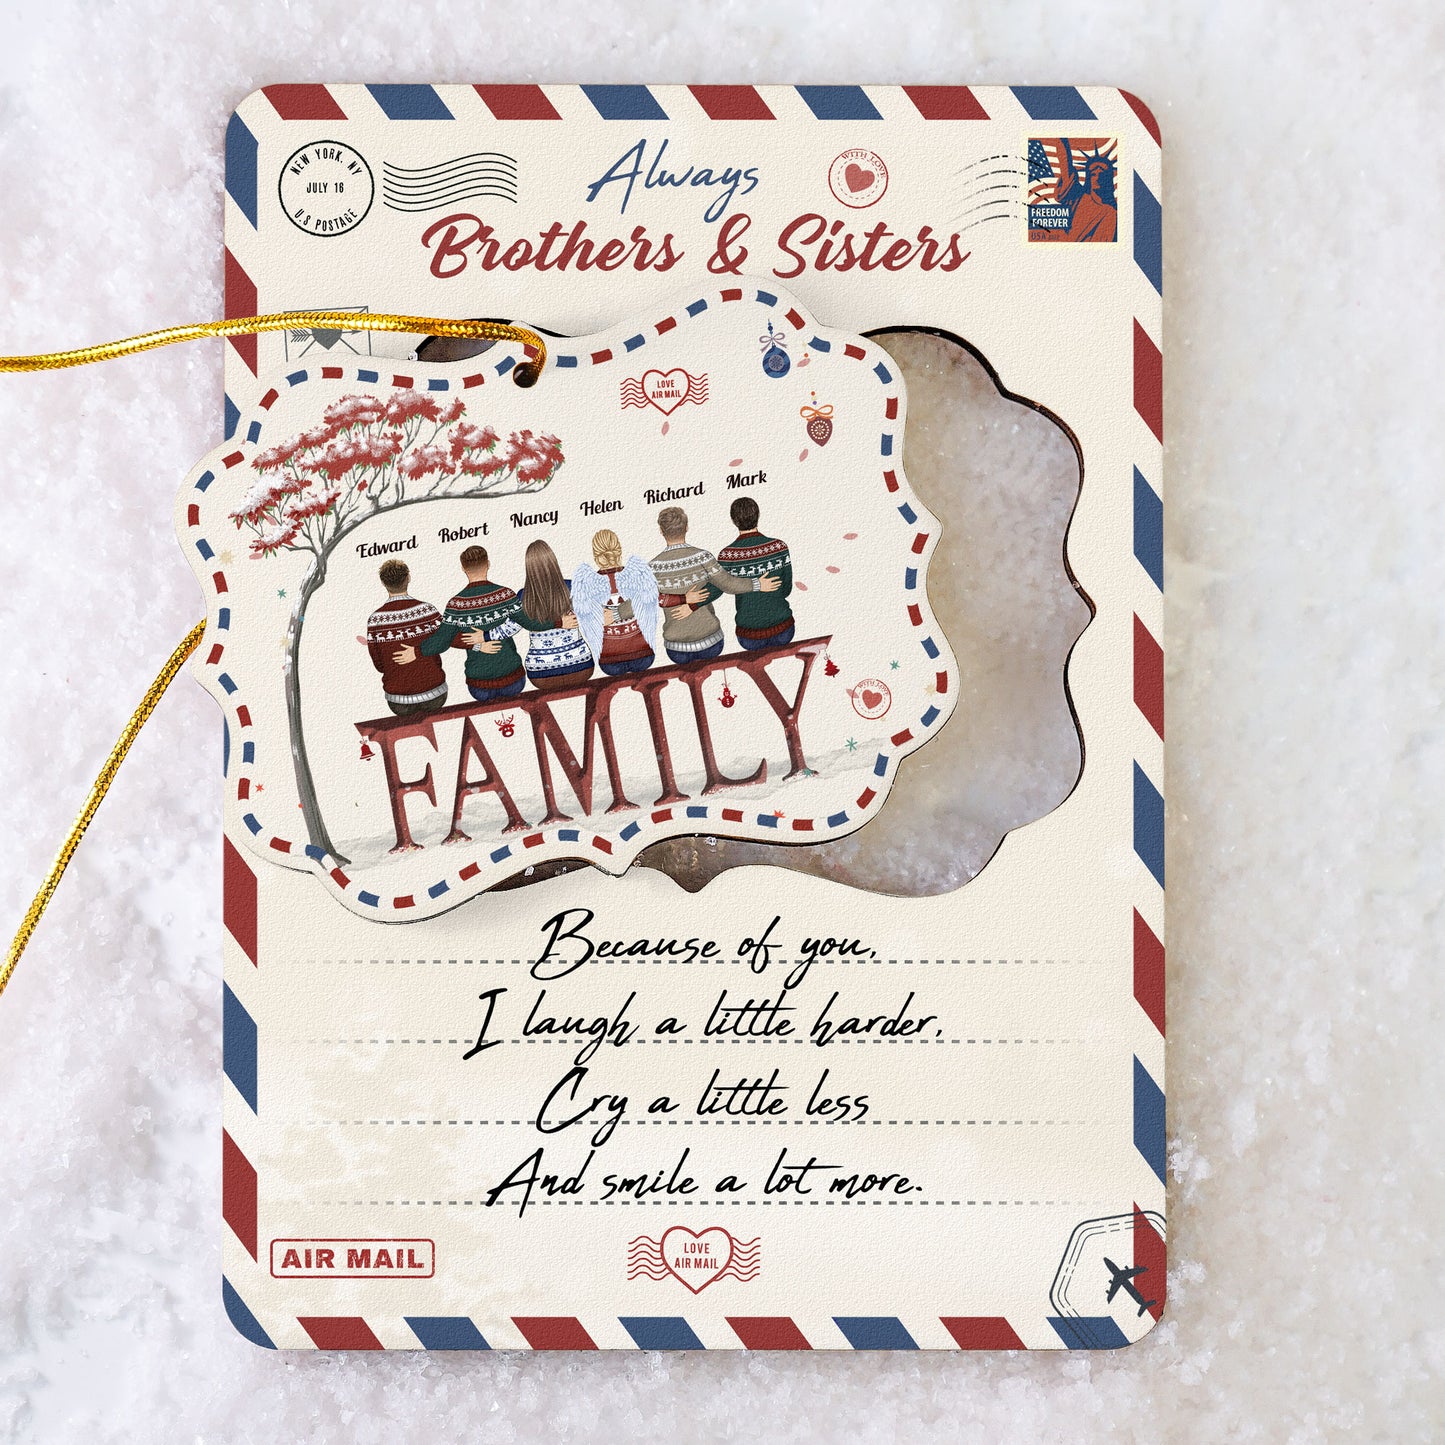 Always Brothers And Sisters - Personalized Christmas Wooden Card With Pop Out Ornament - Christmas Gift For Brothers, Sisters